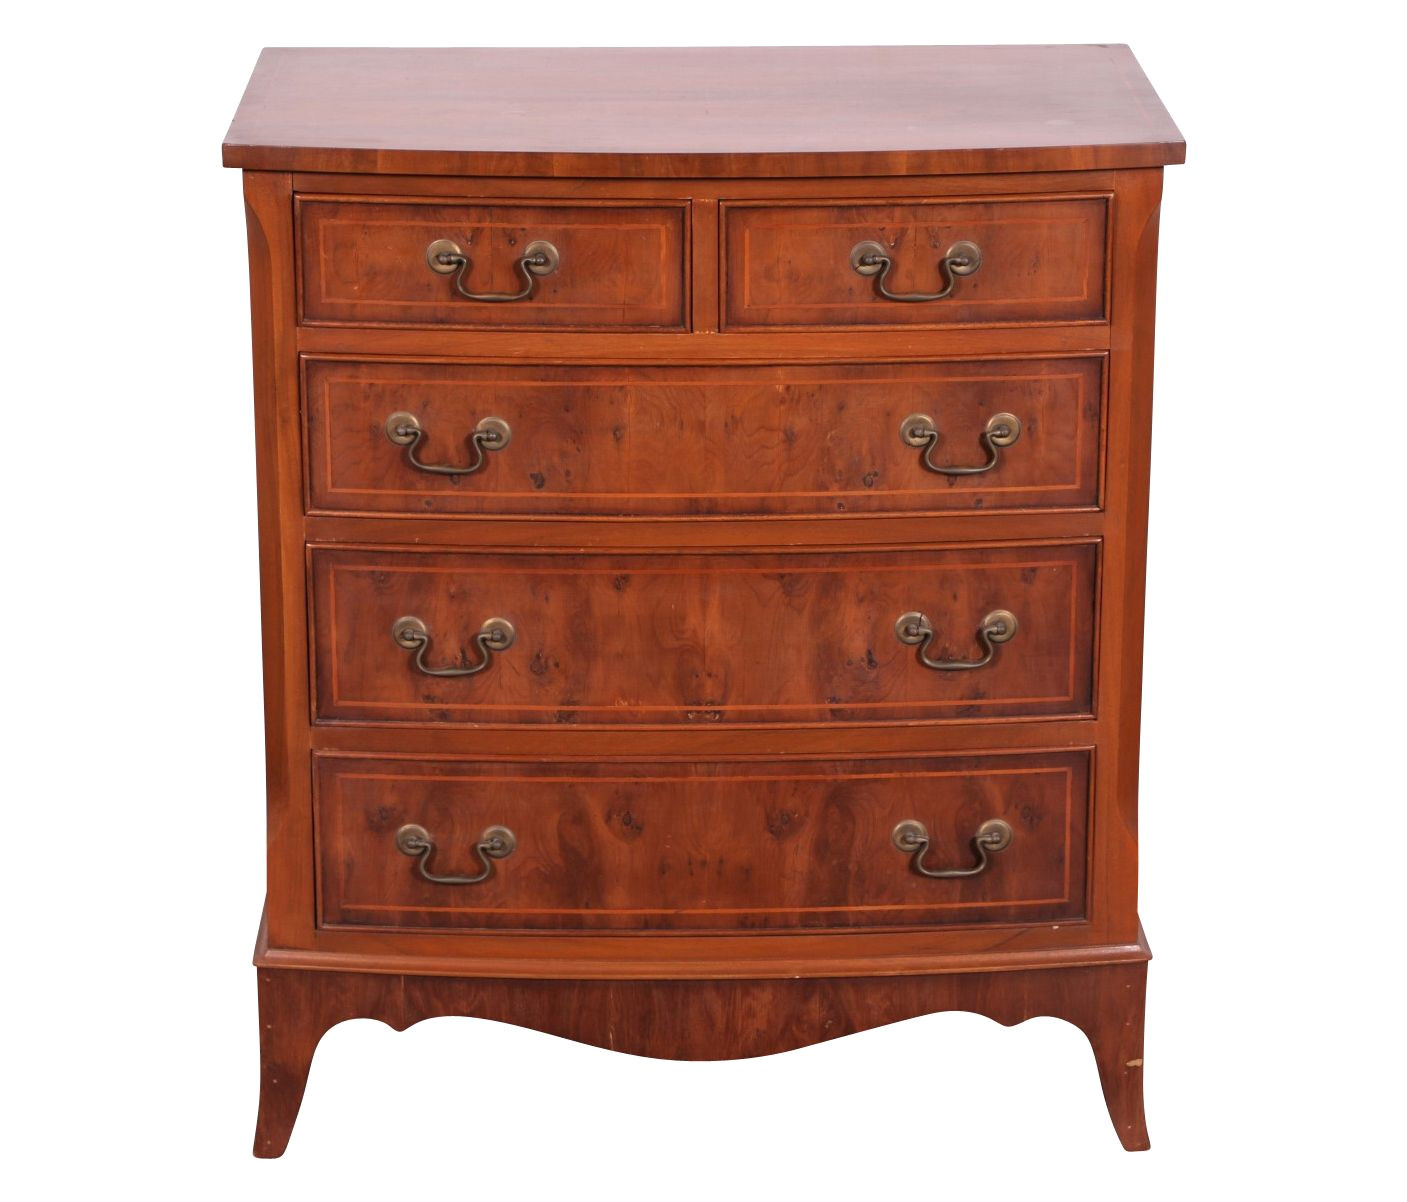 antique chest 2c having 2 over 3 drawers 2c string inlay 2c bracket feet and drop pull hardware